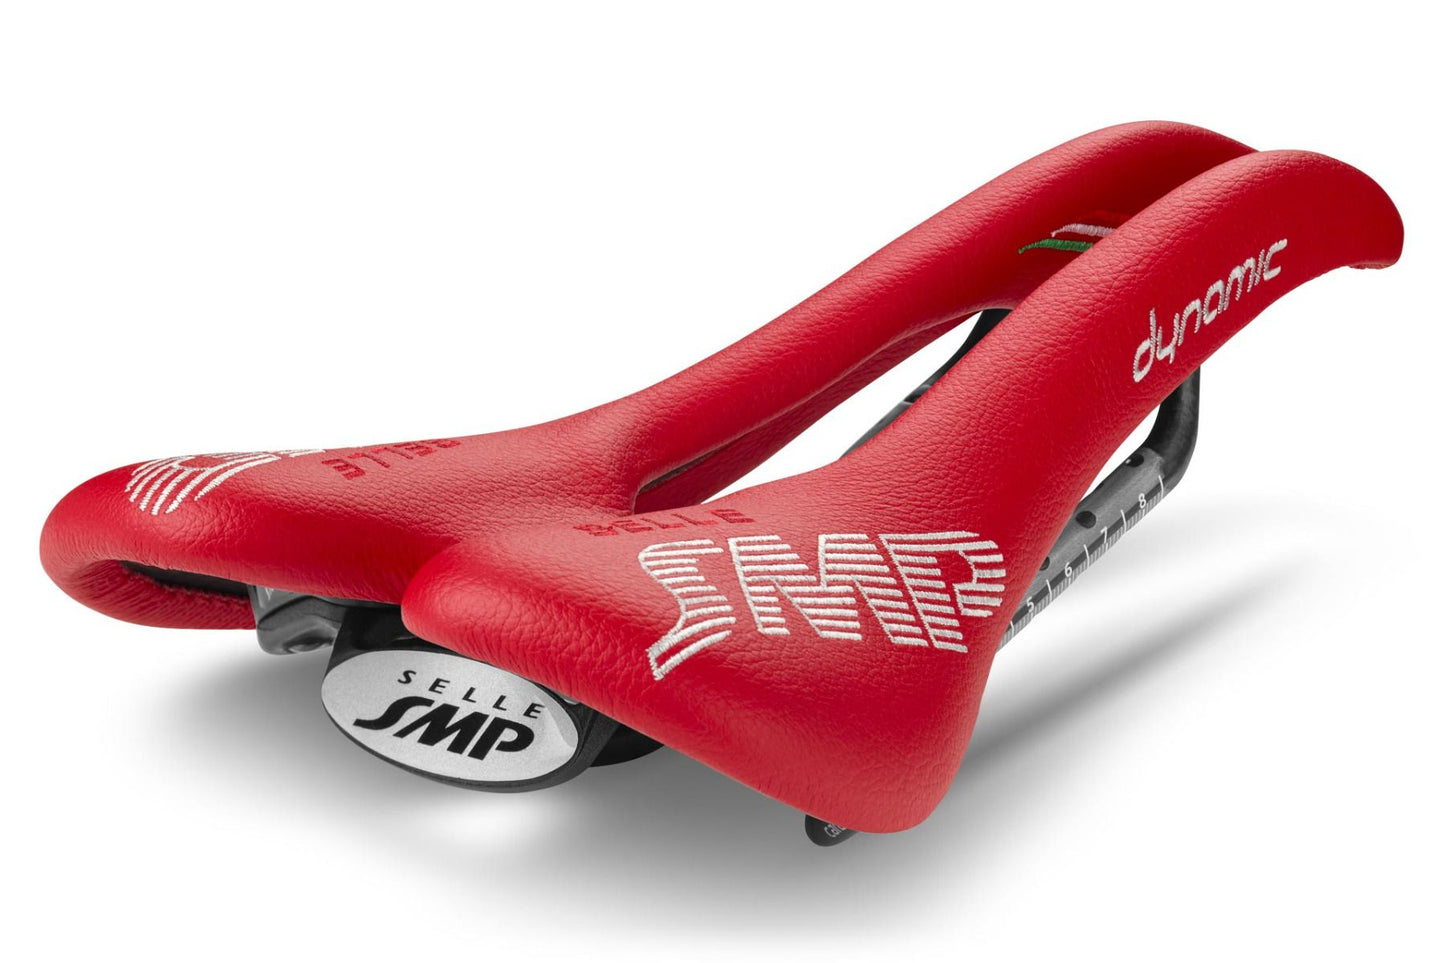 Selle SMP Dynamic Saddle with Carbon Rails (Red)